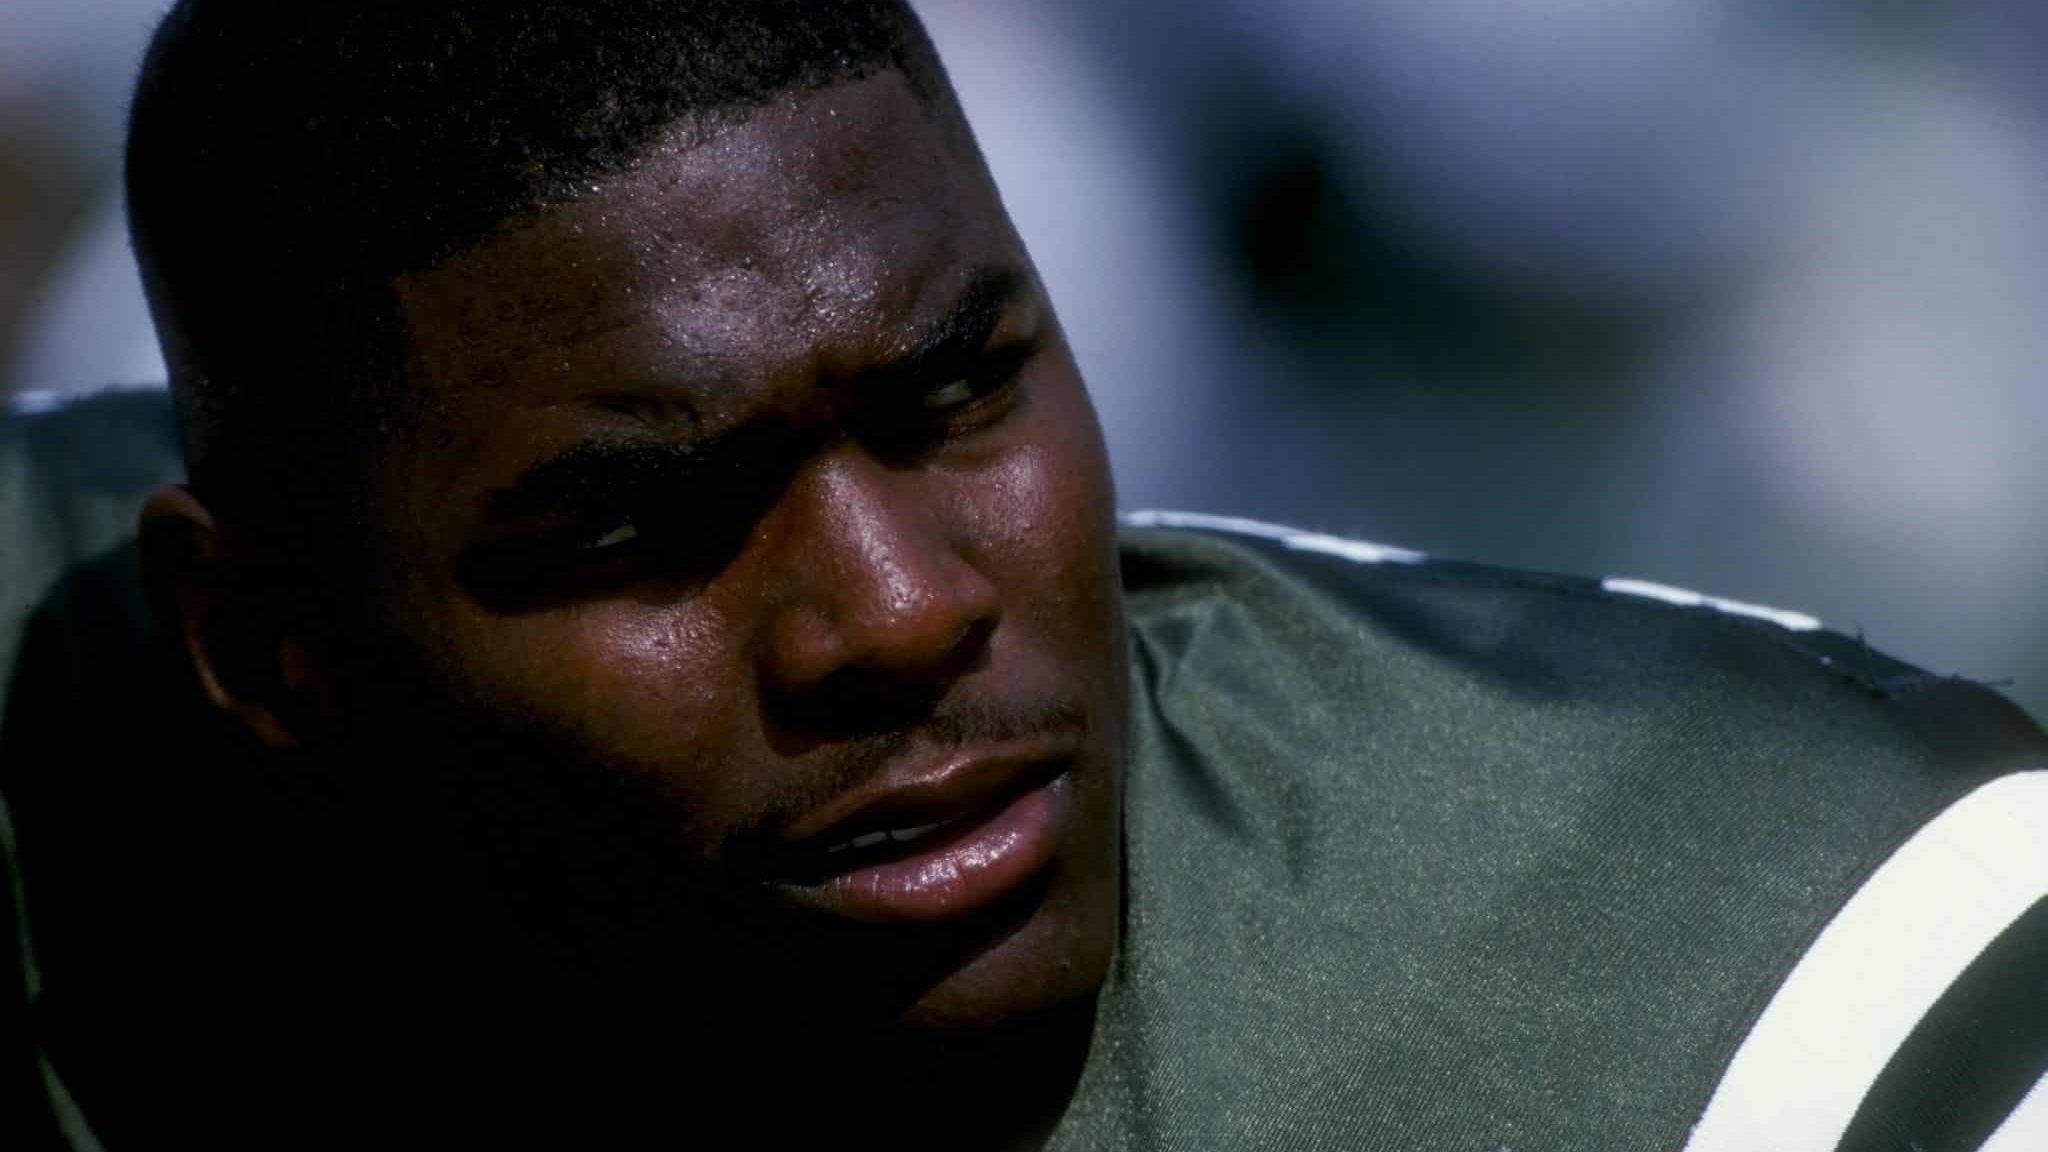 20 Sep 1998: A portrait of Keyshawn Johnson #19 of the New York Jets taken as he looks across the field during the game against the Indianapolis Colts at Giant Stadium in East Rutherford, New Jersey. The Jets defeated the Colts 44-6.